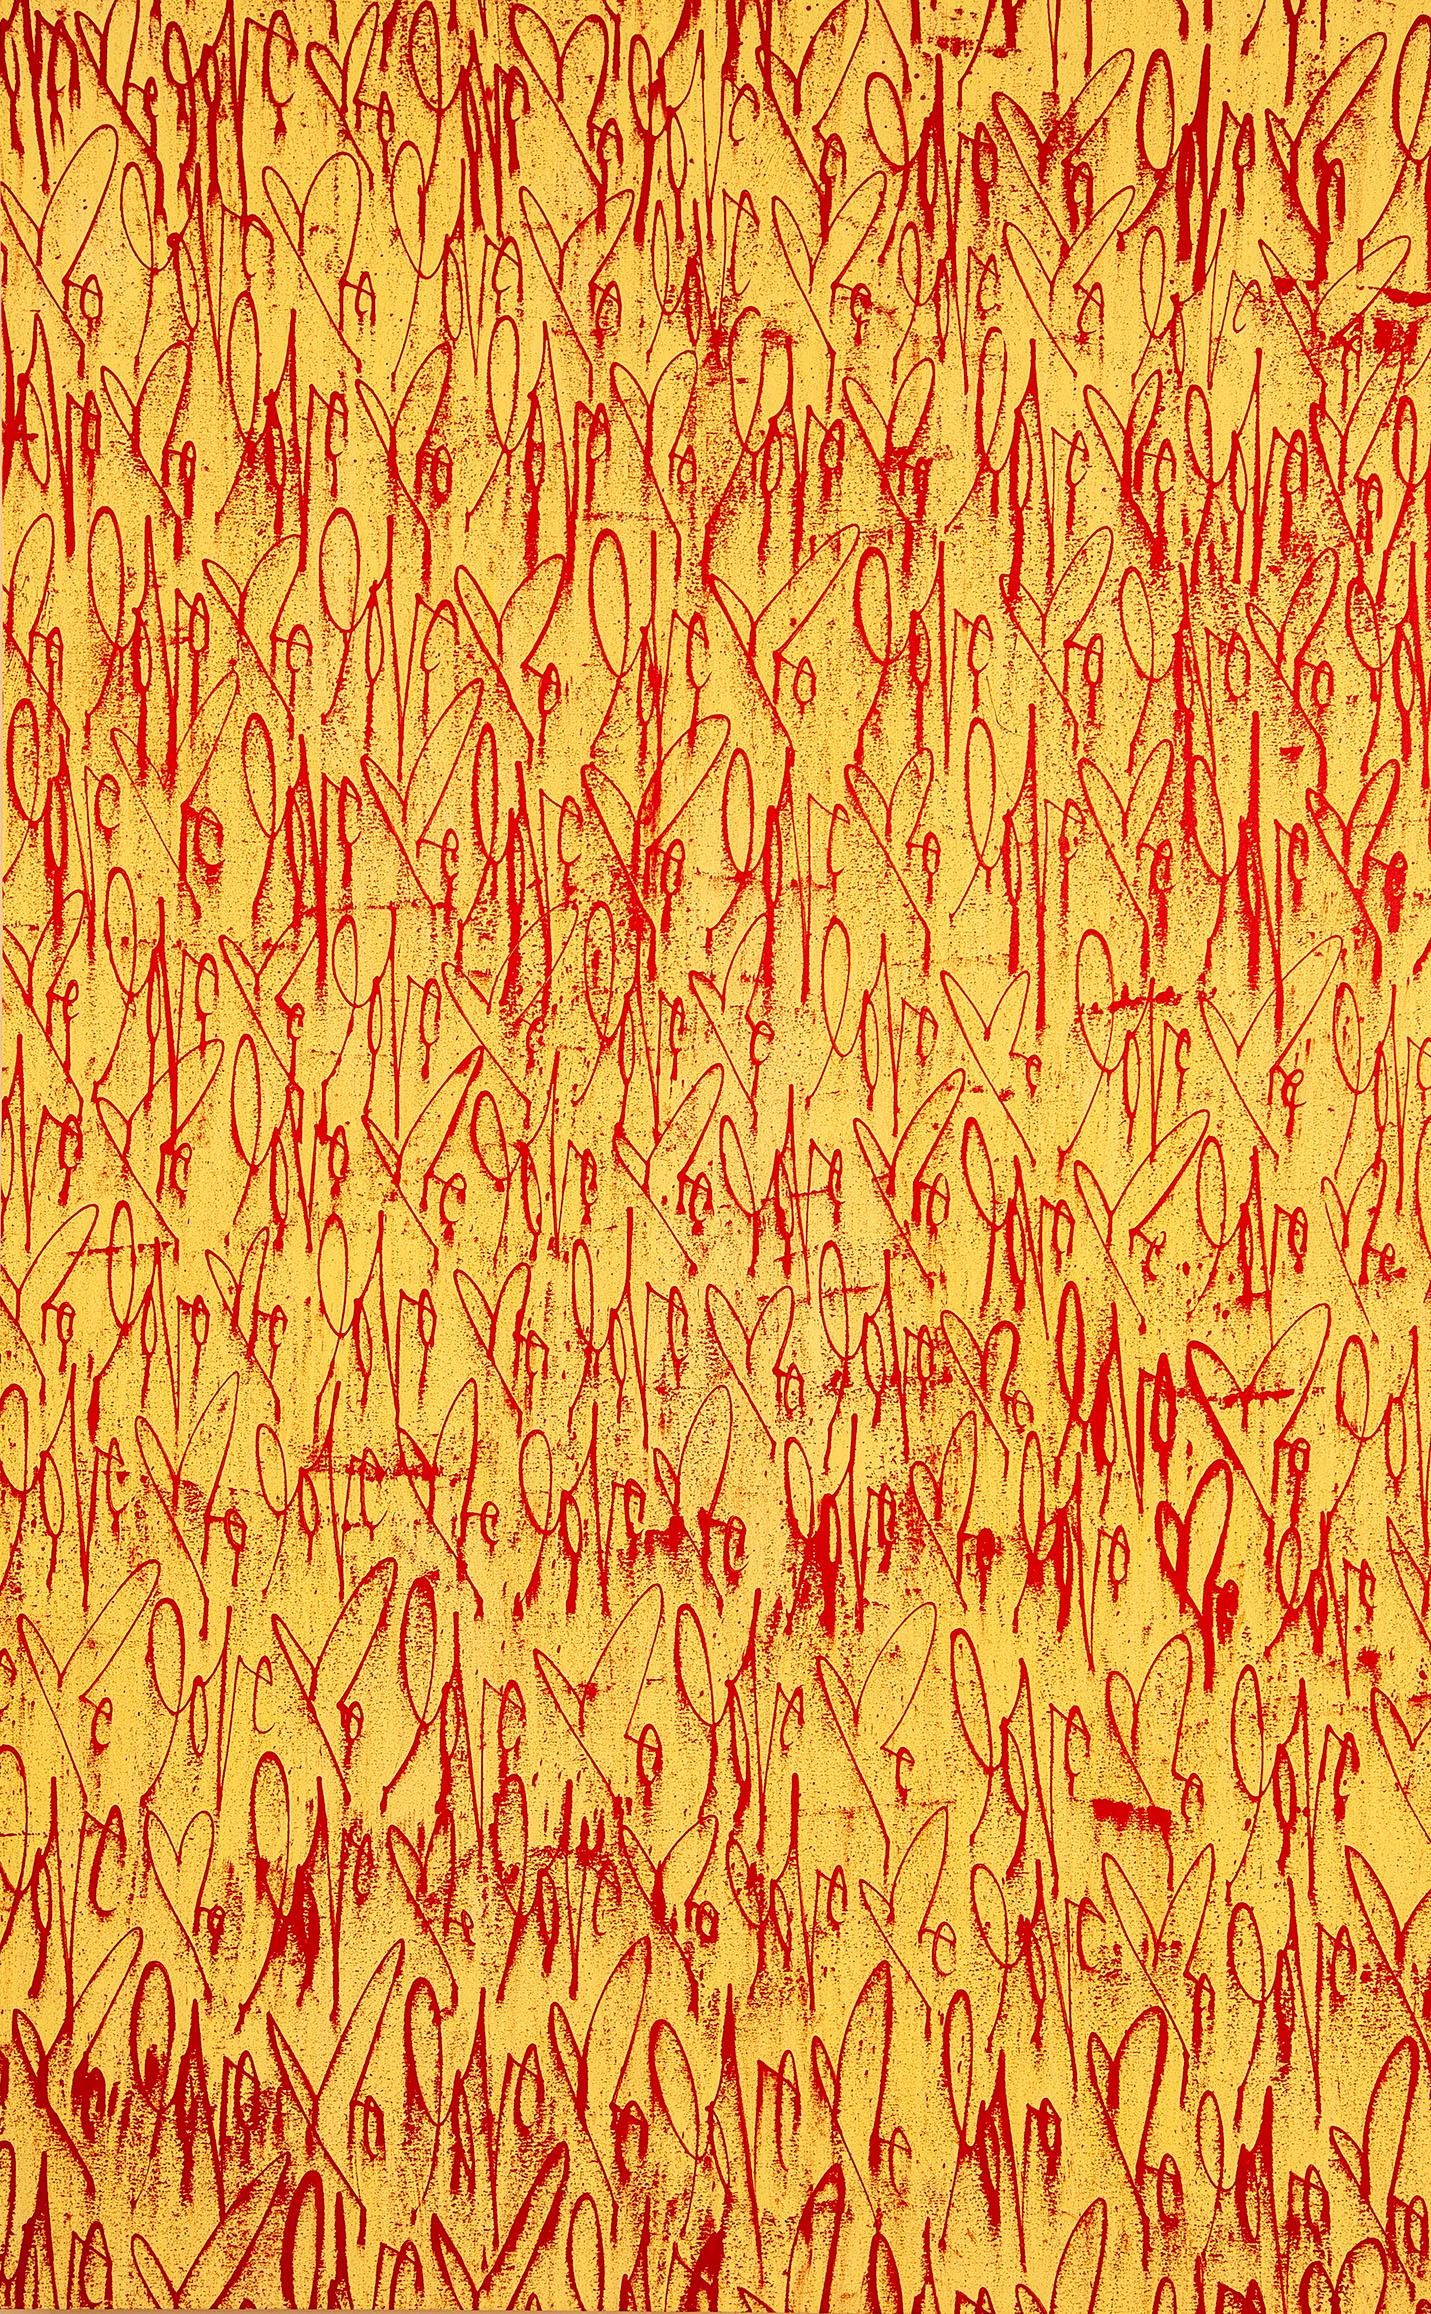 Curtis Kulig, Love Me on Canvas (Yellow & Red), 2011:
This one of a kind ’Love Me' painting is impossible to overlook. An expressionist yellow background combined with Kulig's iconic red tag, encapsulates this grand gesture of the artist in its